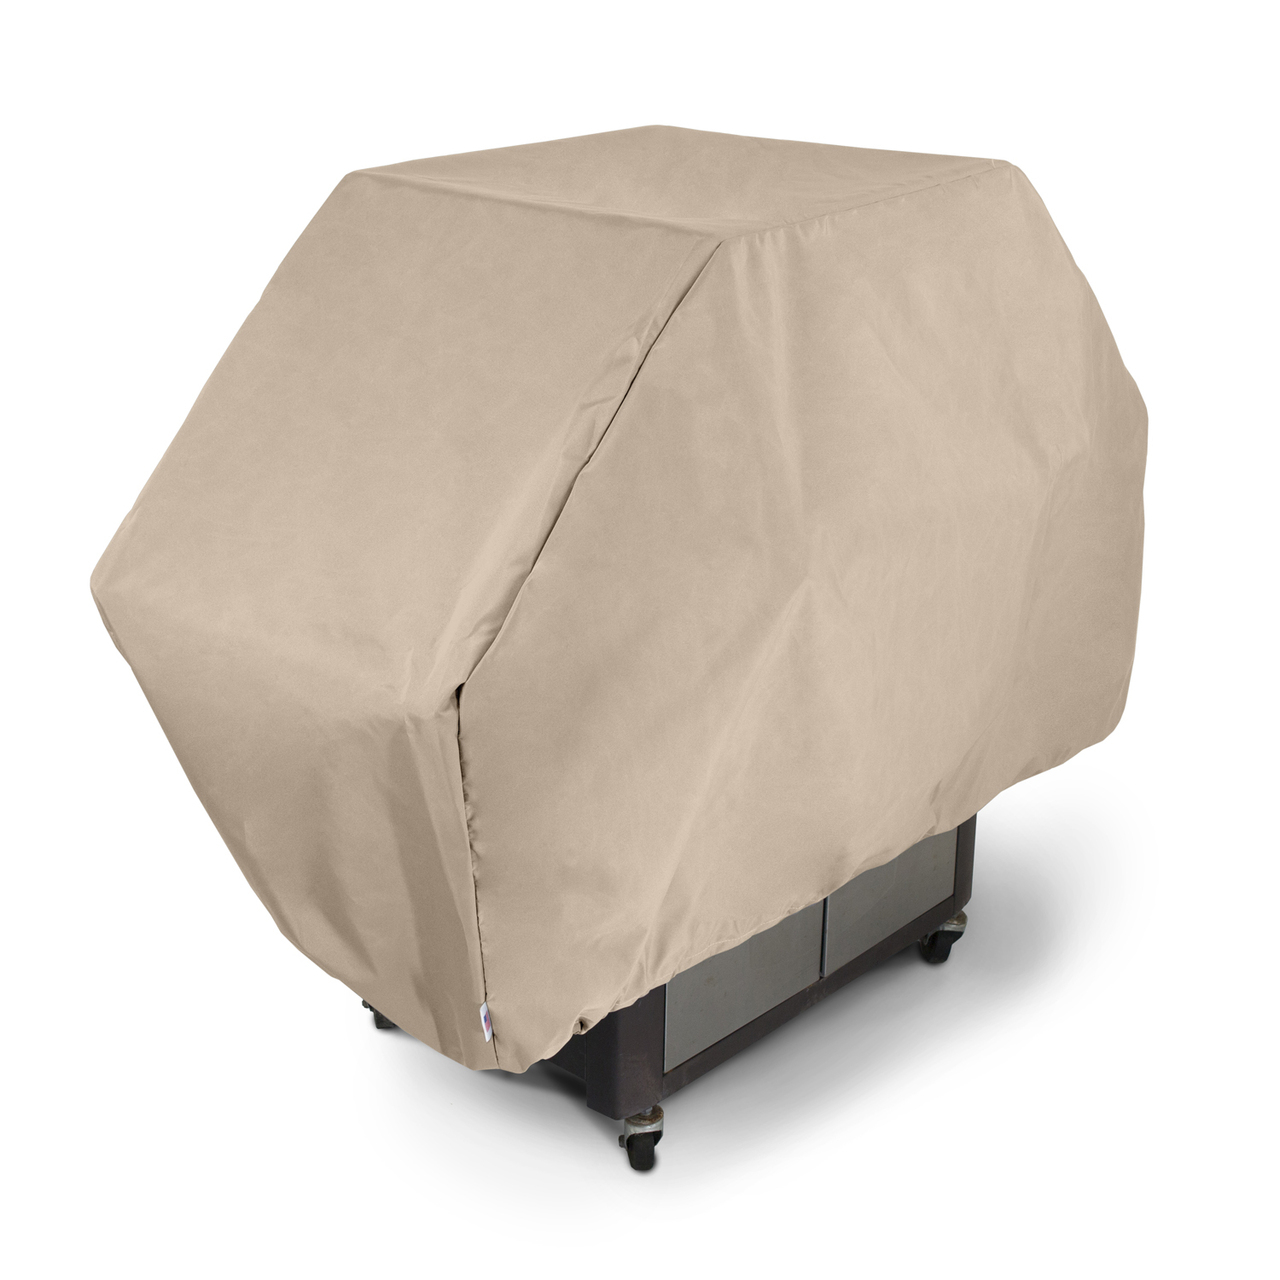 Grill Cover - 55W x 23D x 23H in.